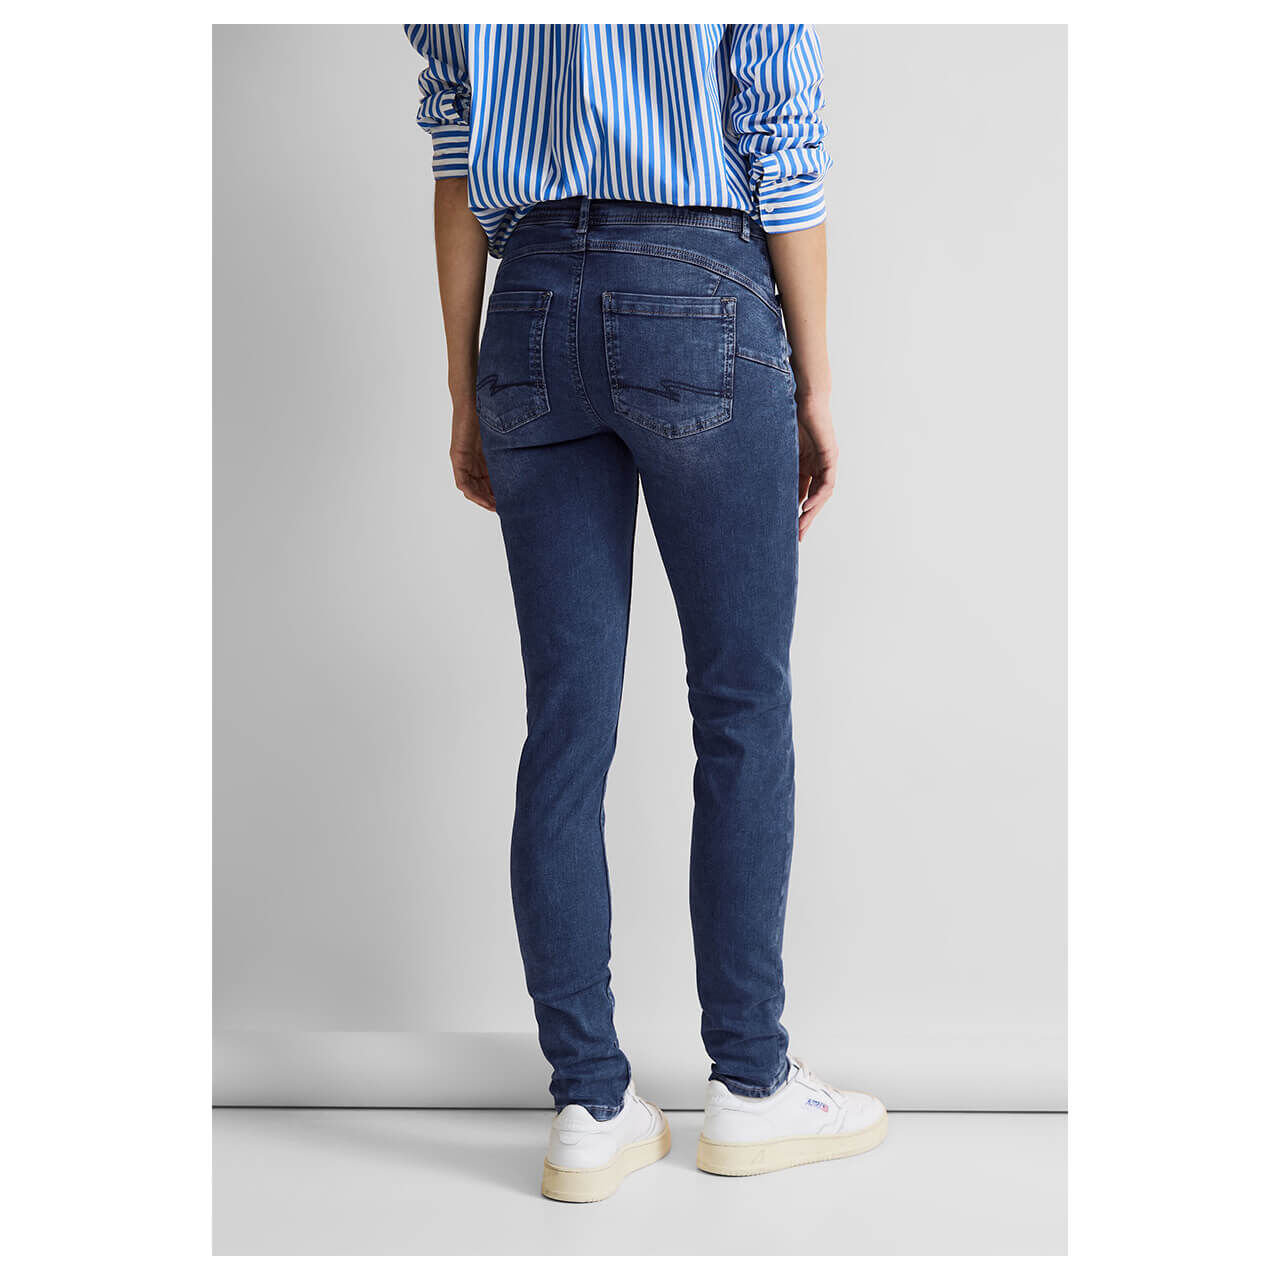 Street One York Jeans mid blue washed